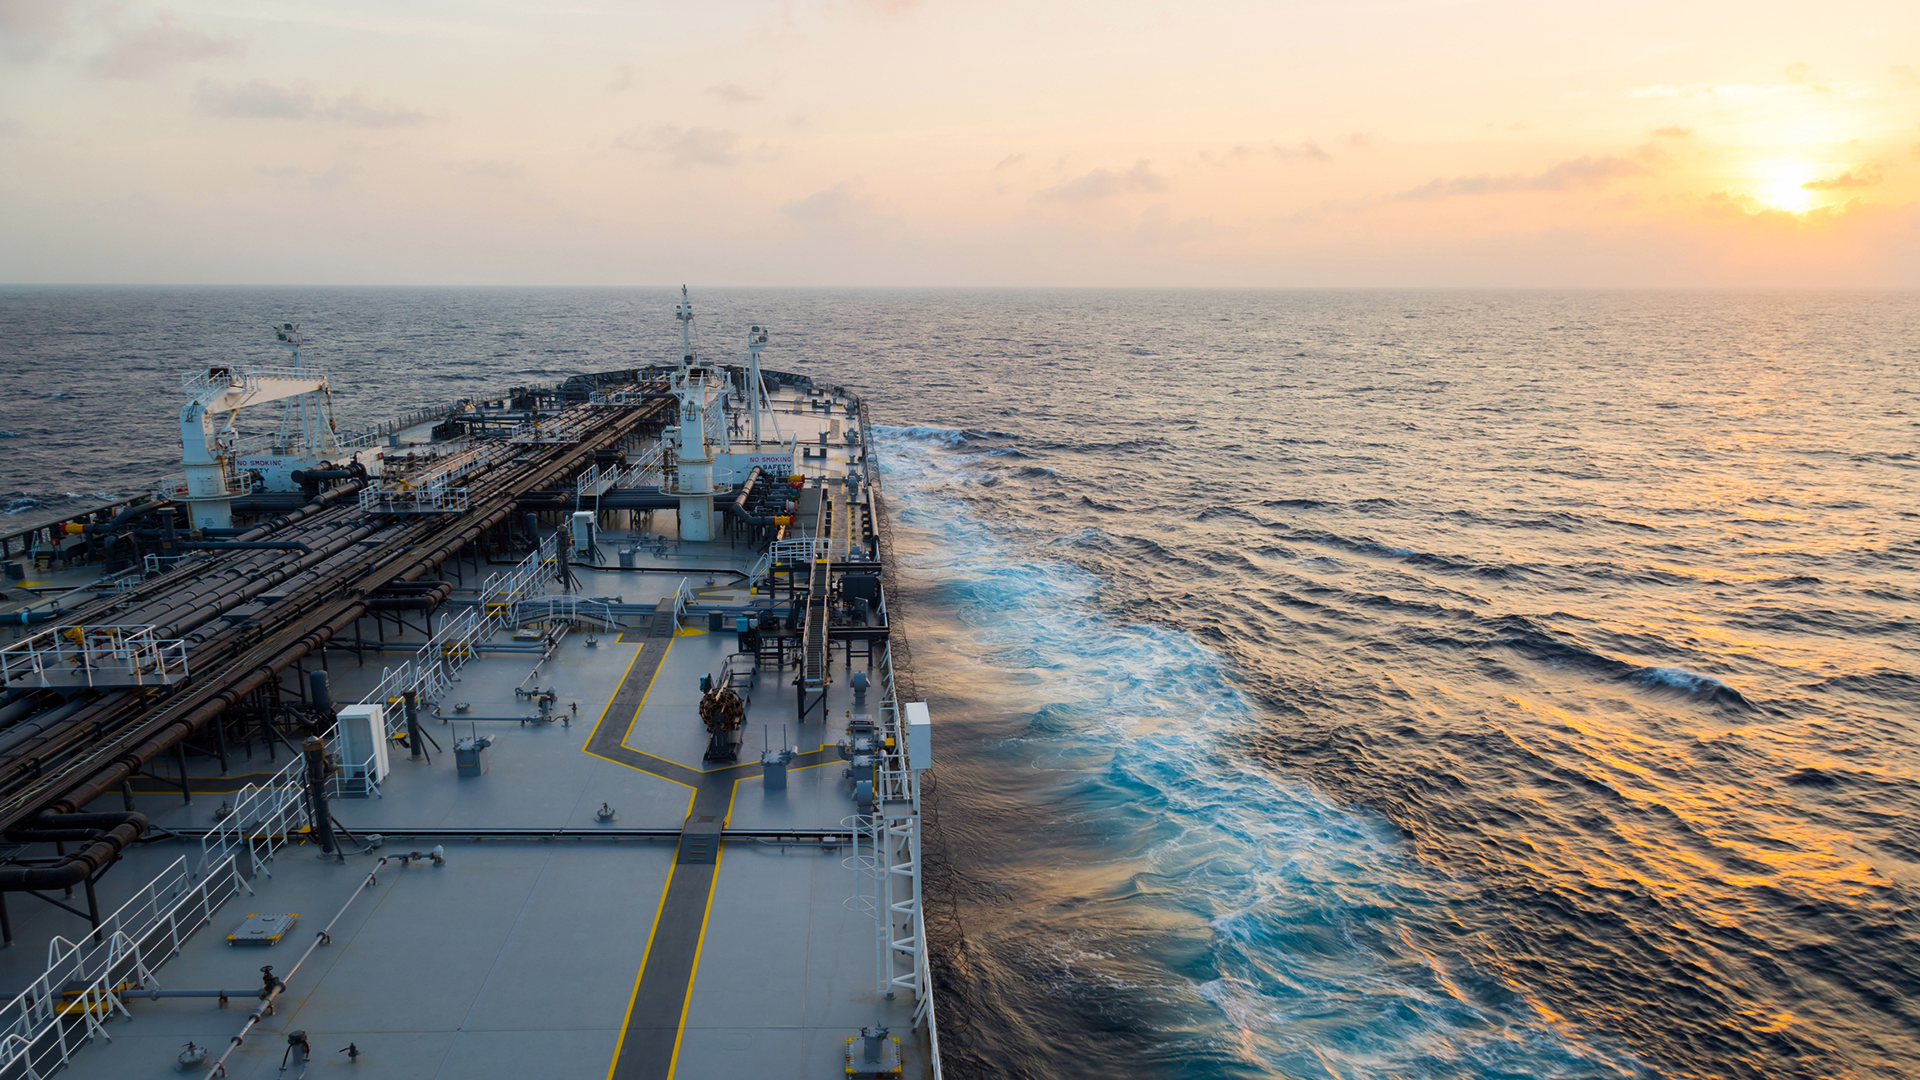 Using vessels as floating storage for crude oil: A risky business